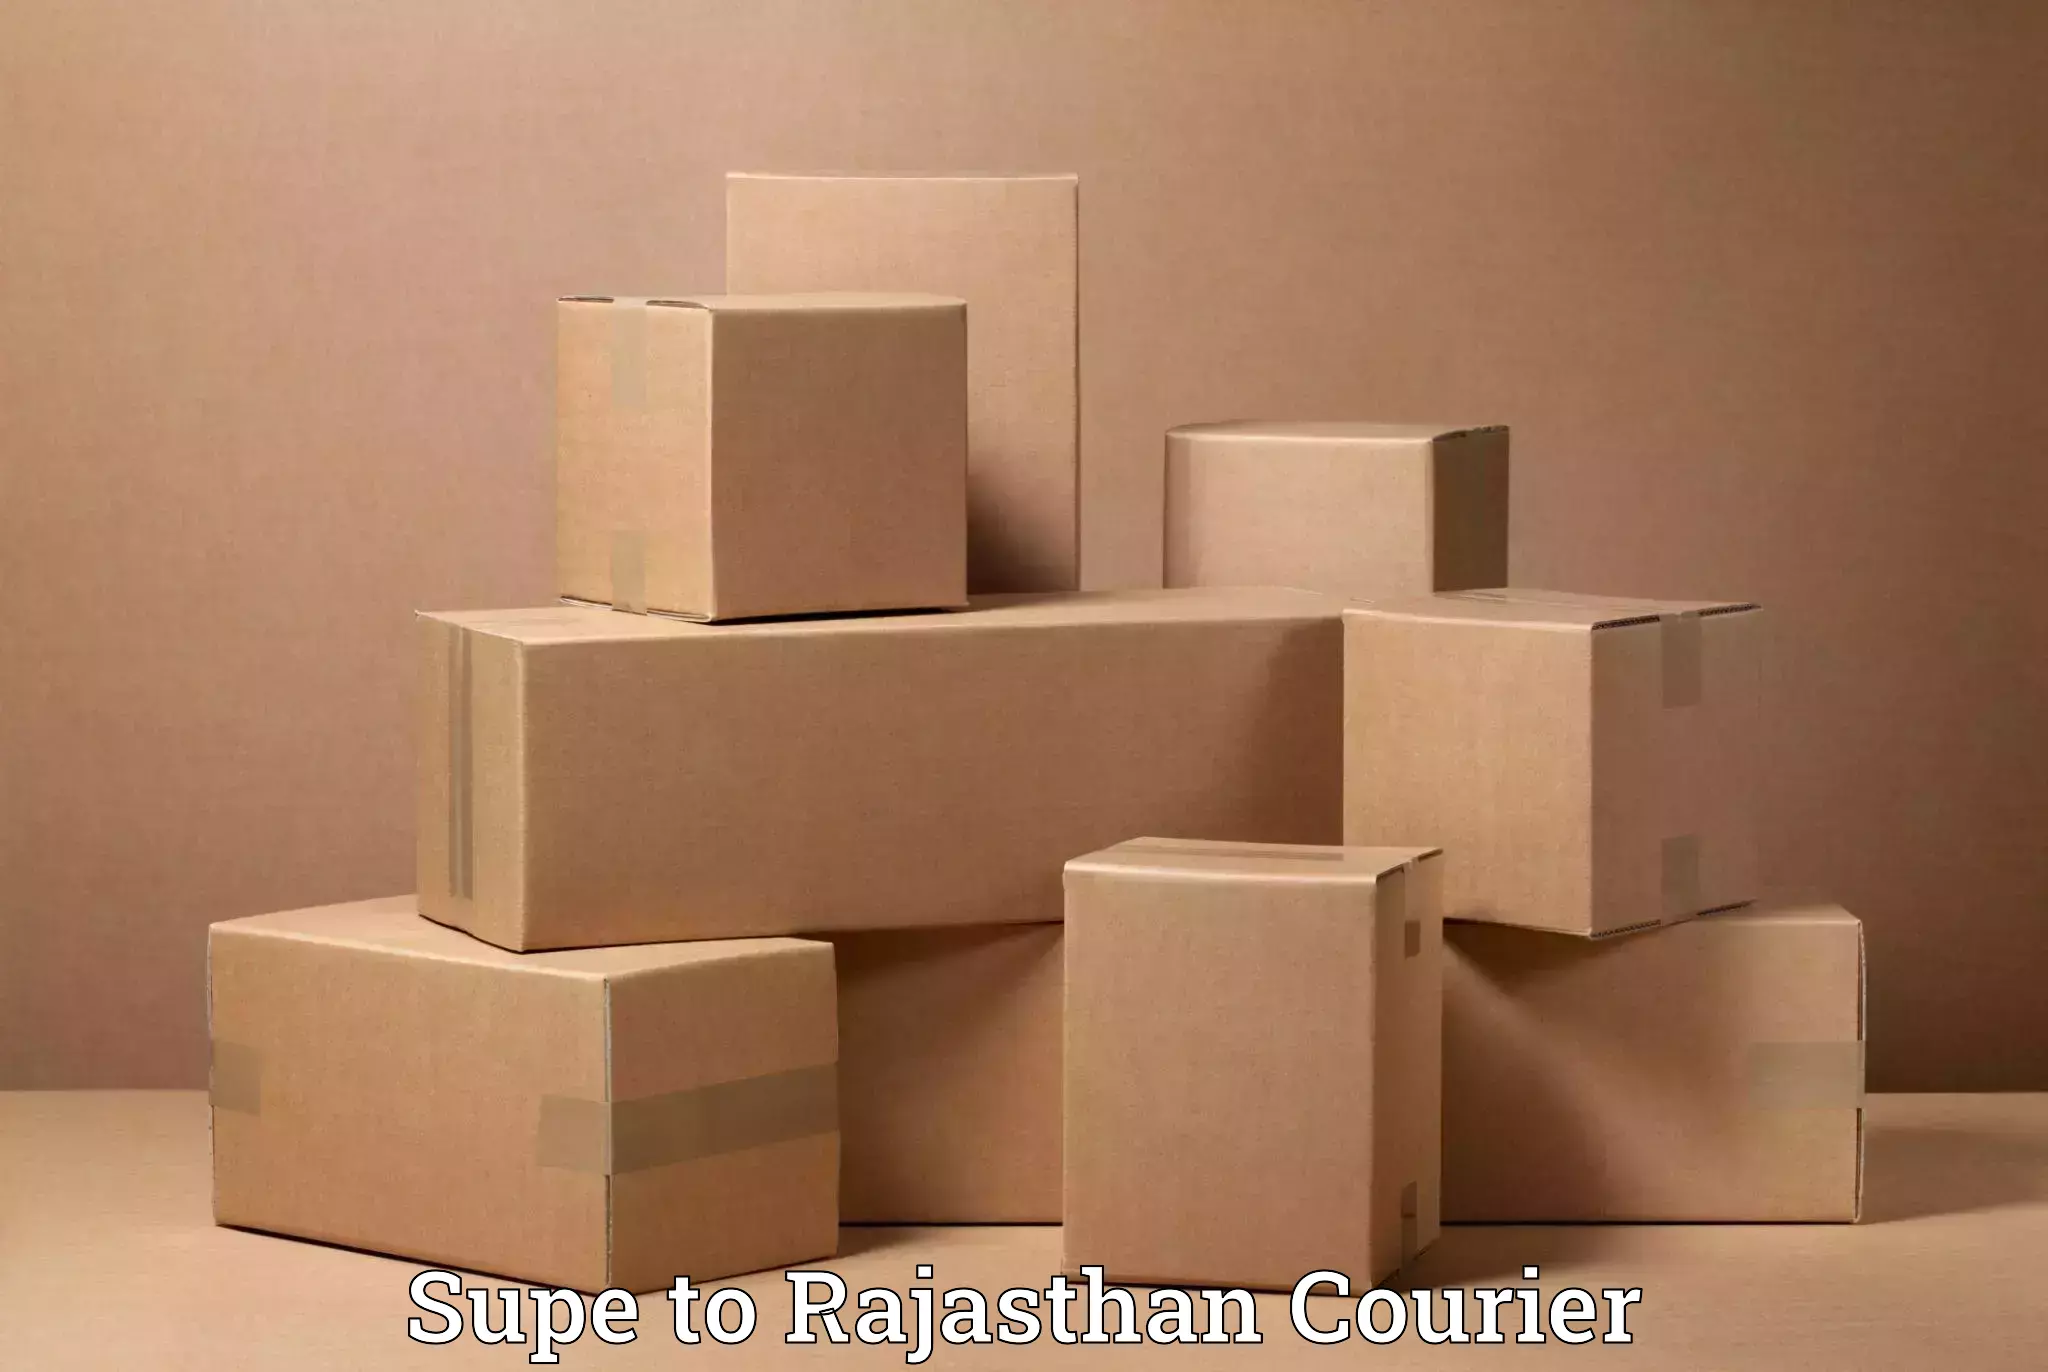 Professional movers in Supe to Jaipur